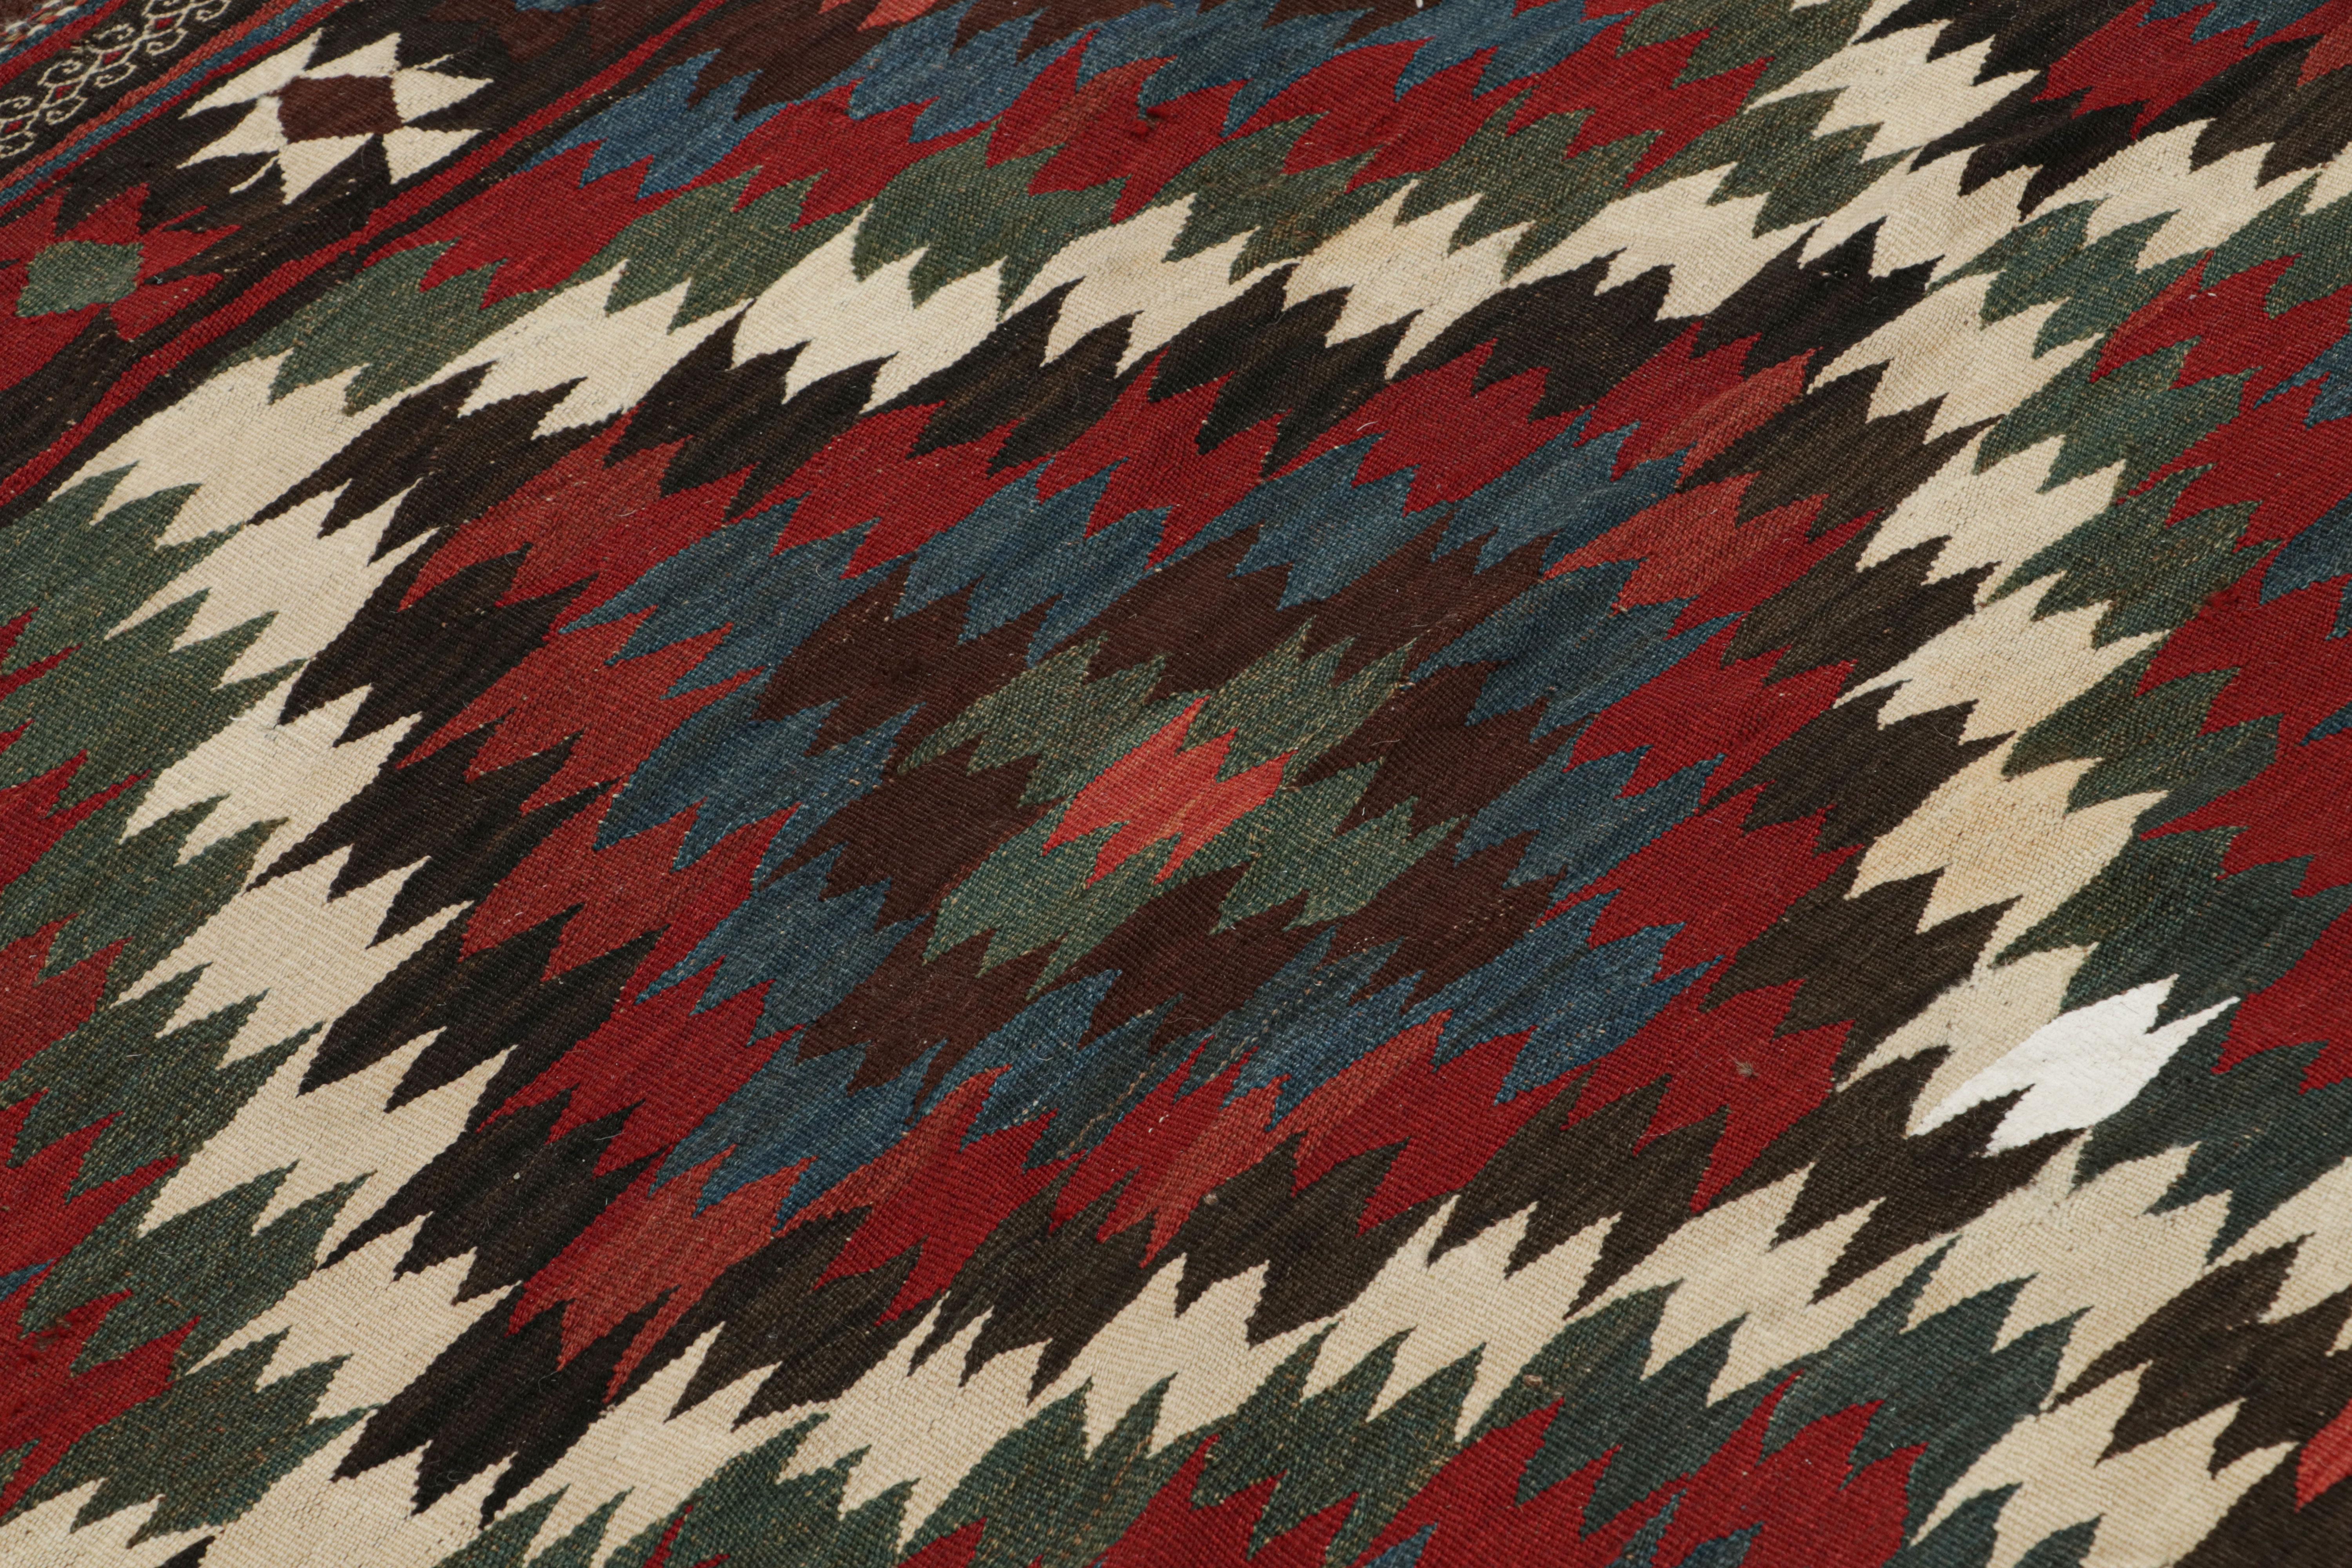 Early 20th Century Vintage Kilim with Red, Teal and Blue Geometric Patterns, from Rug & Kilim  For Sale